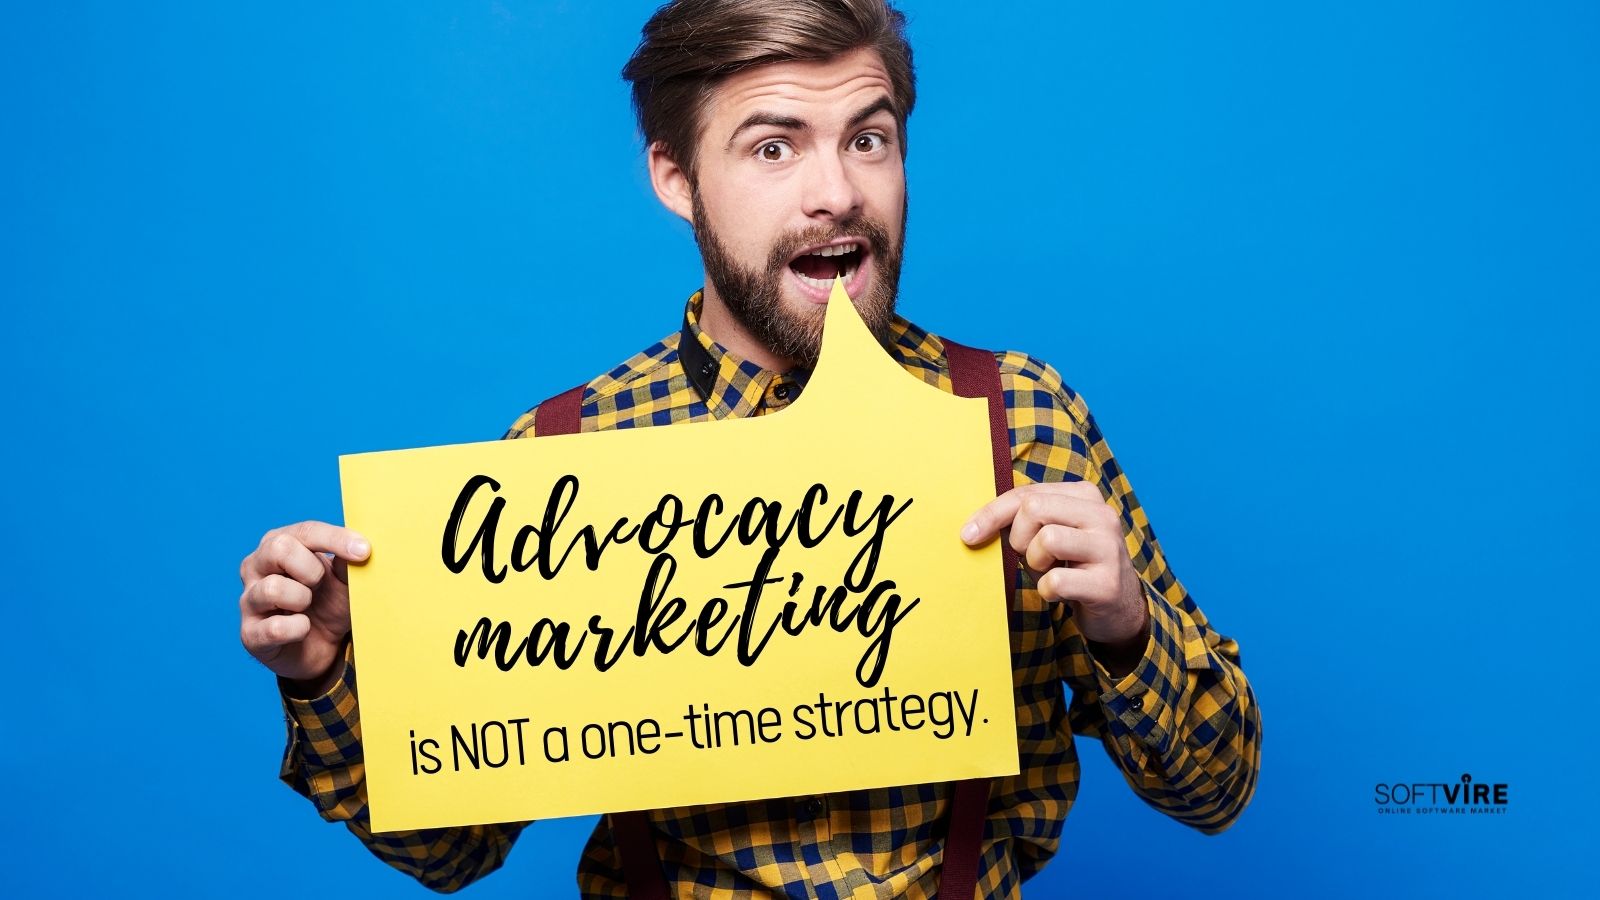 Advocacy Marketing is not a one time strategy - Twitter - Softvire Global